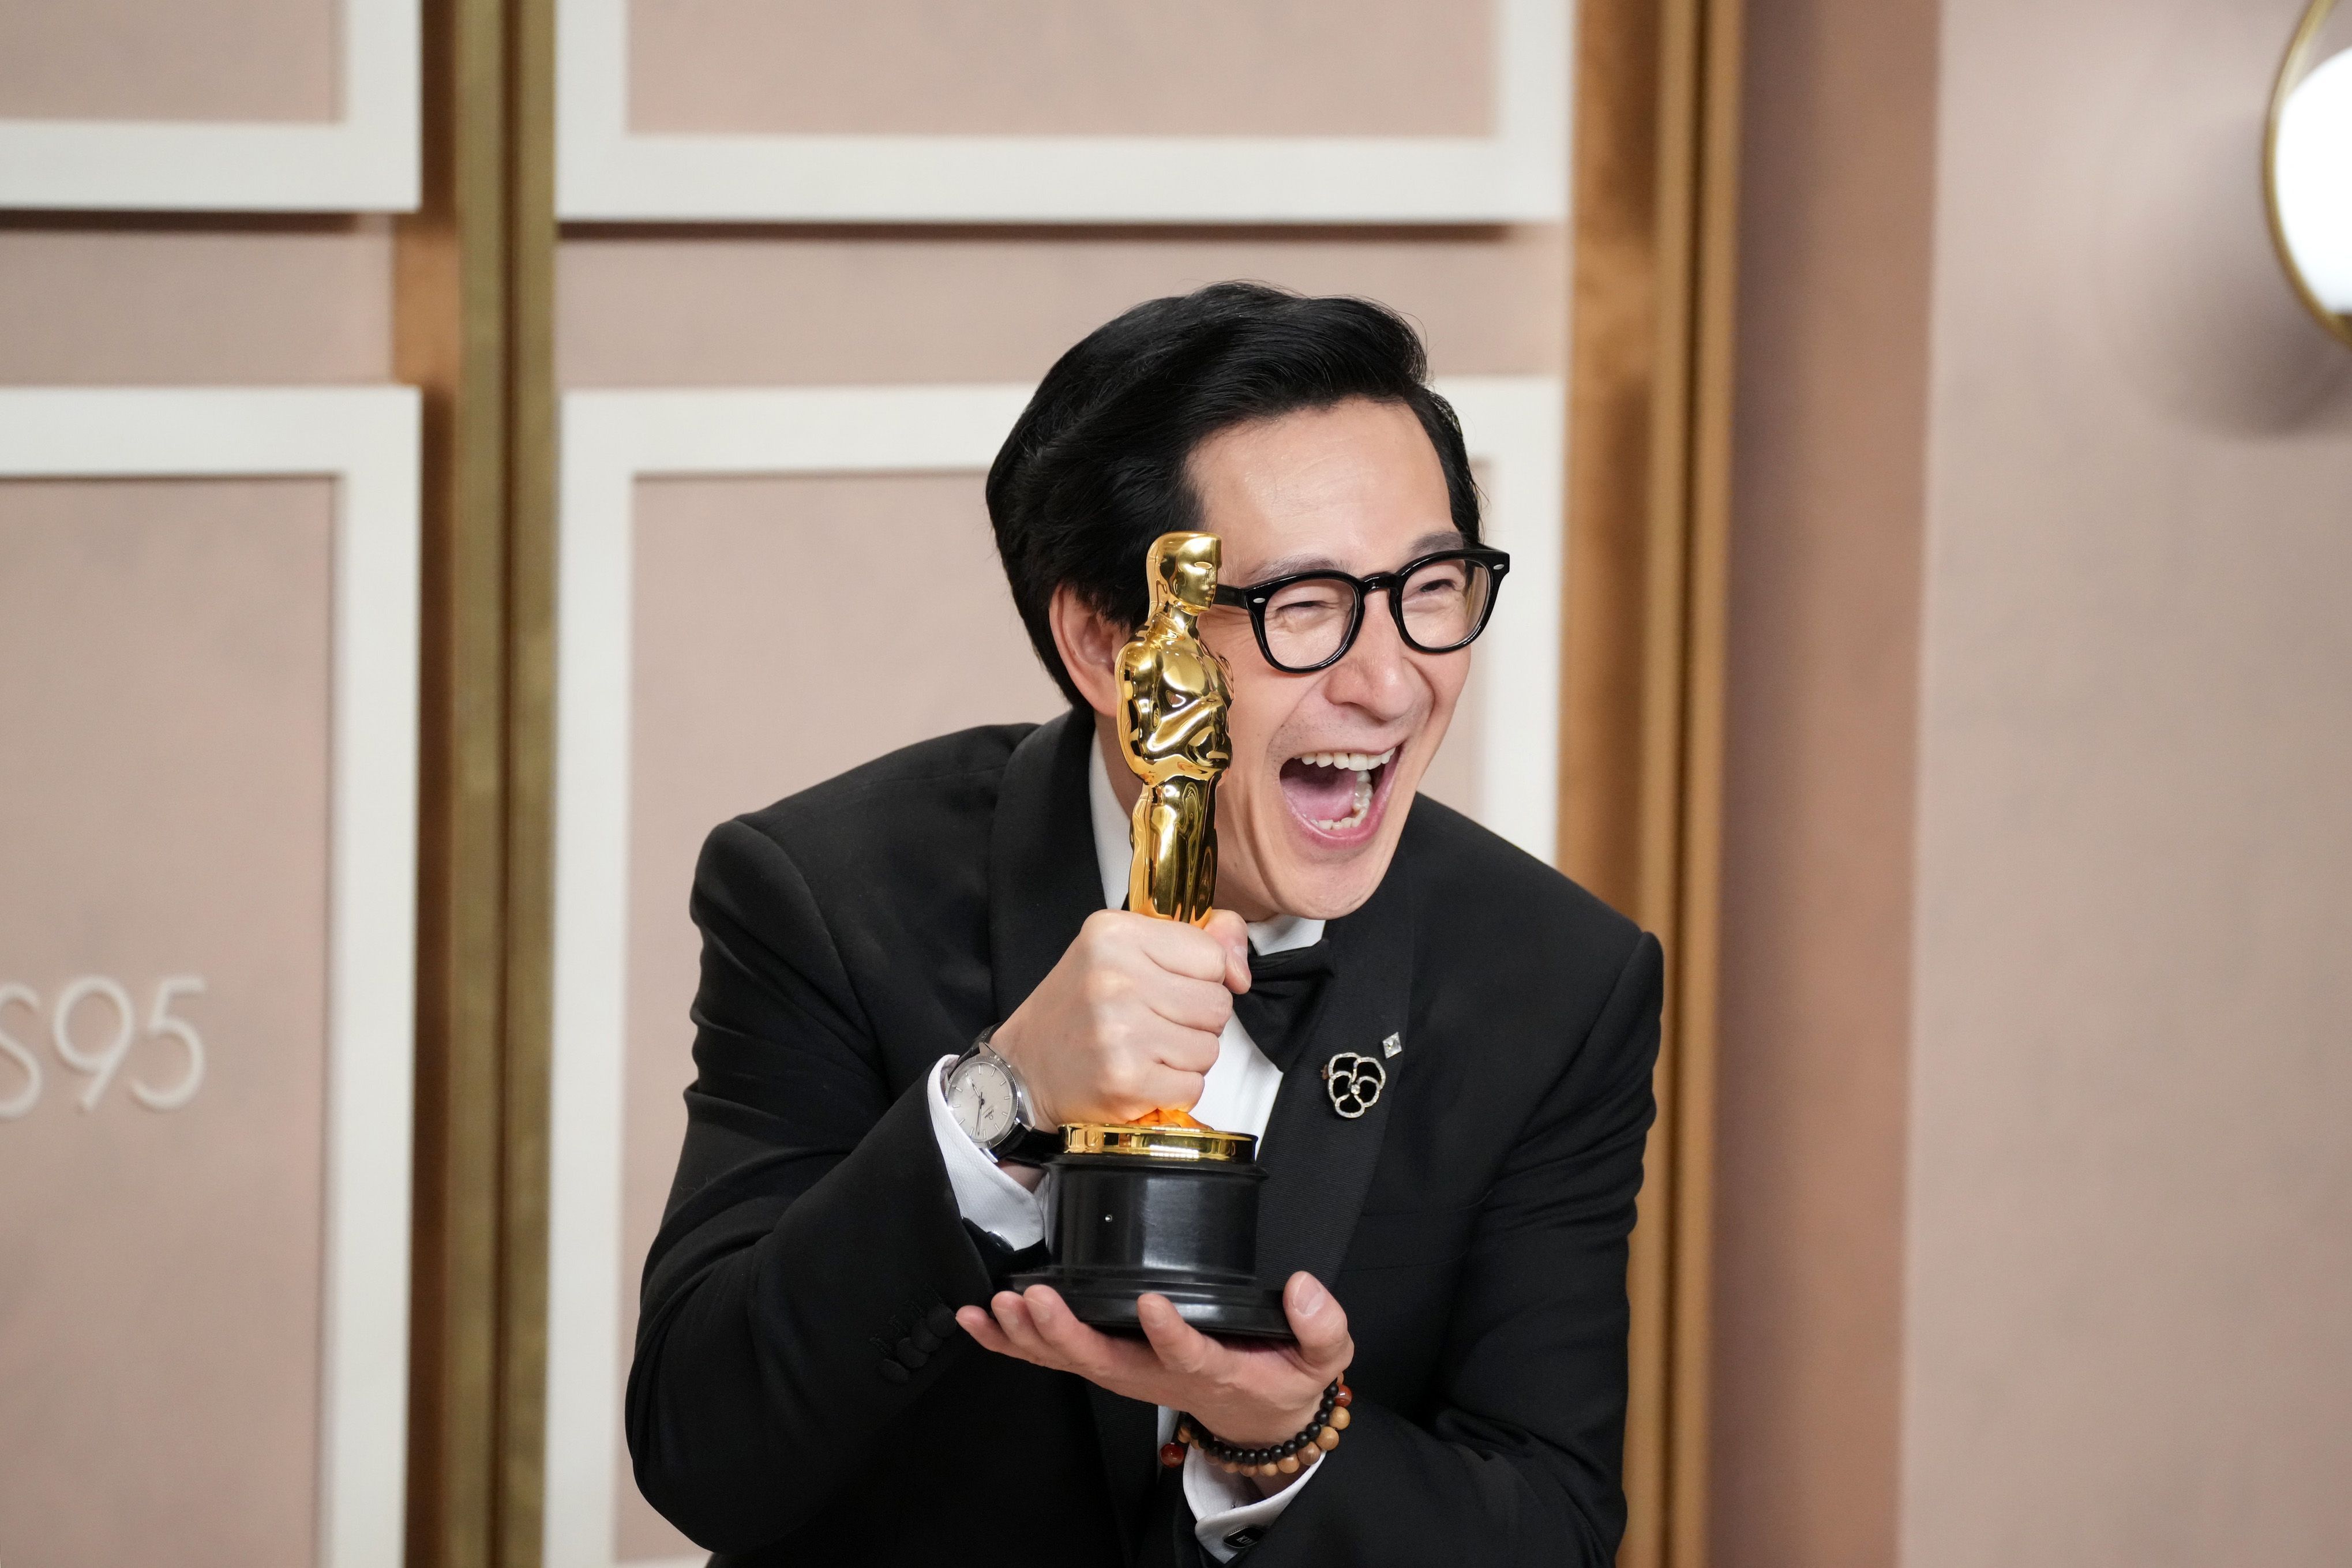 Ke Huy Quan in a black suit smiling with an Academy Award.